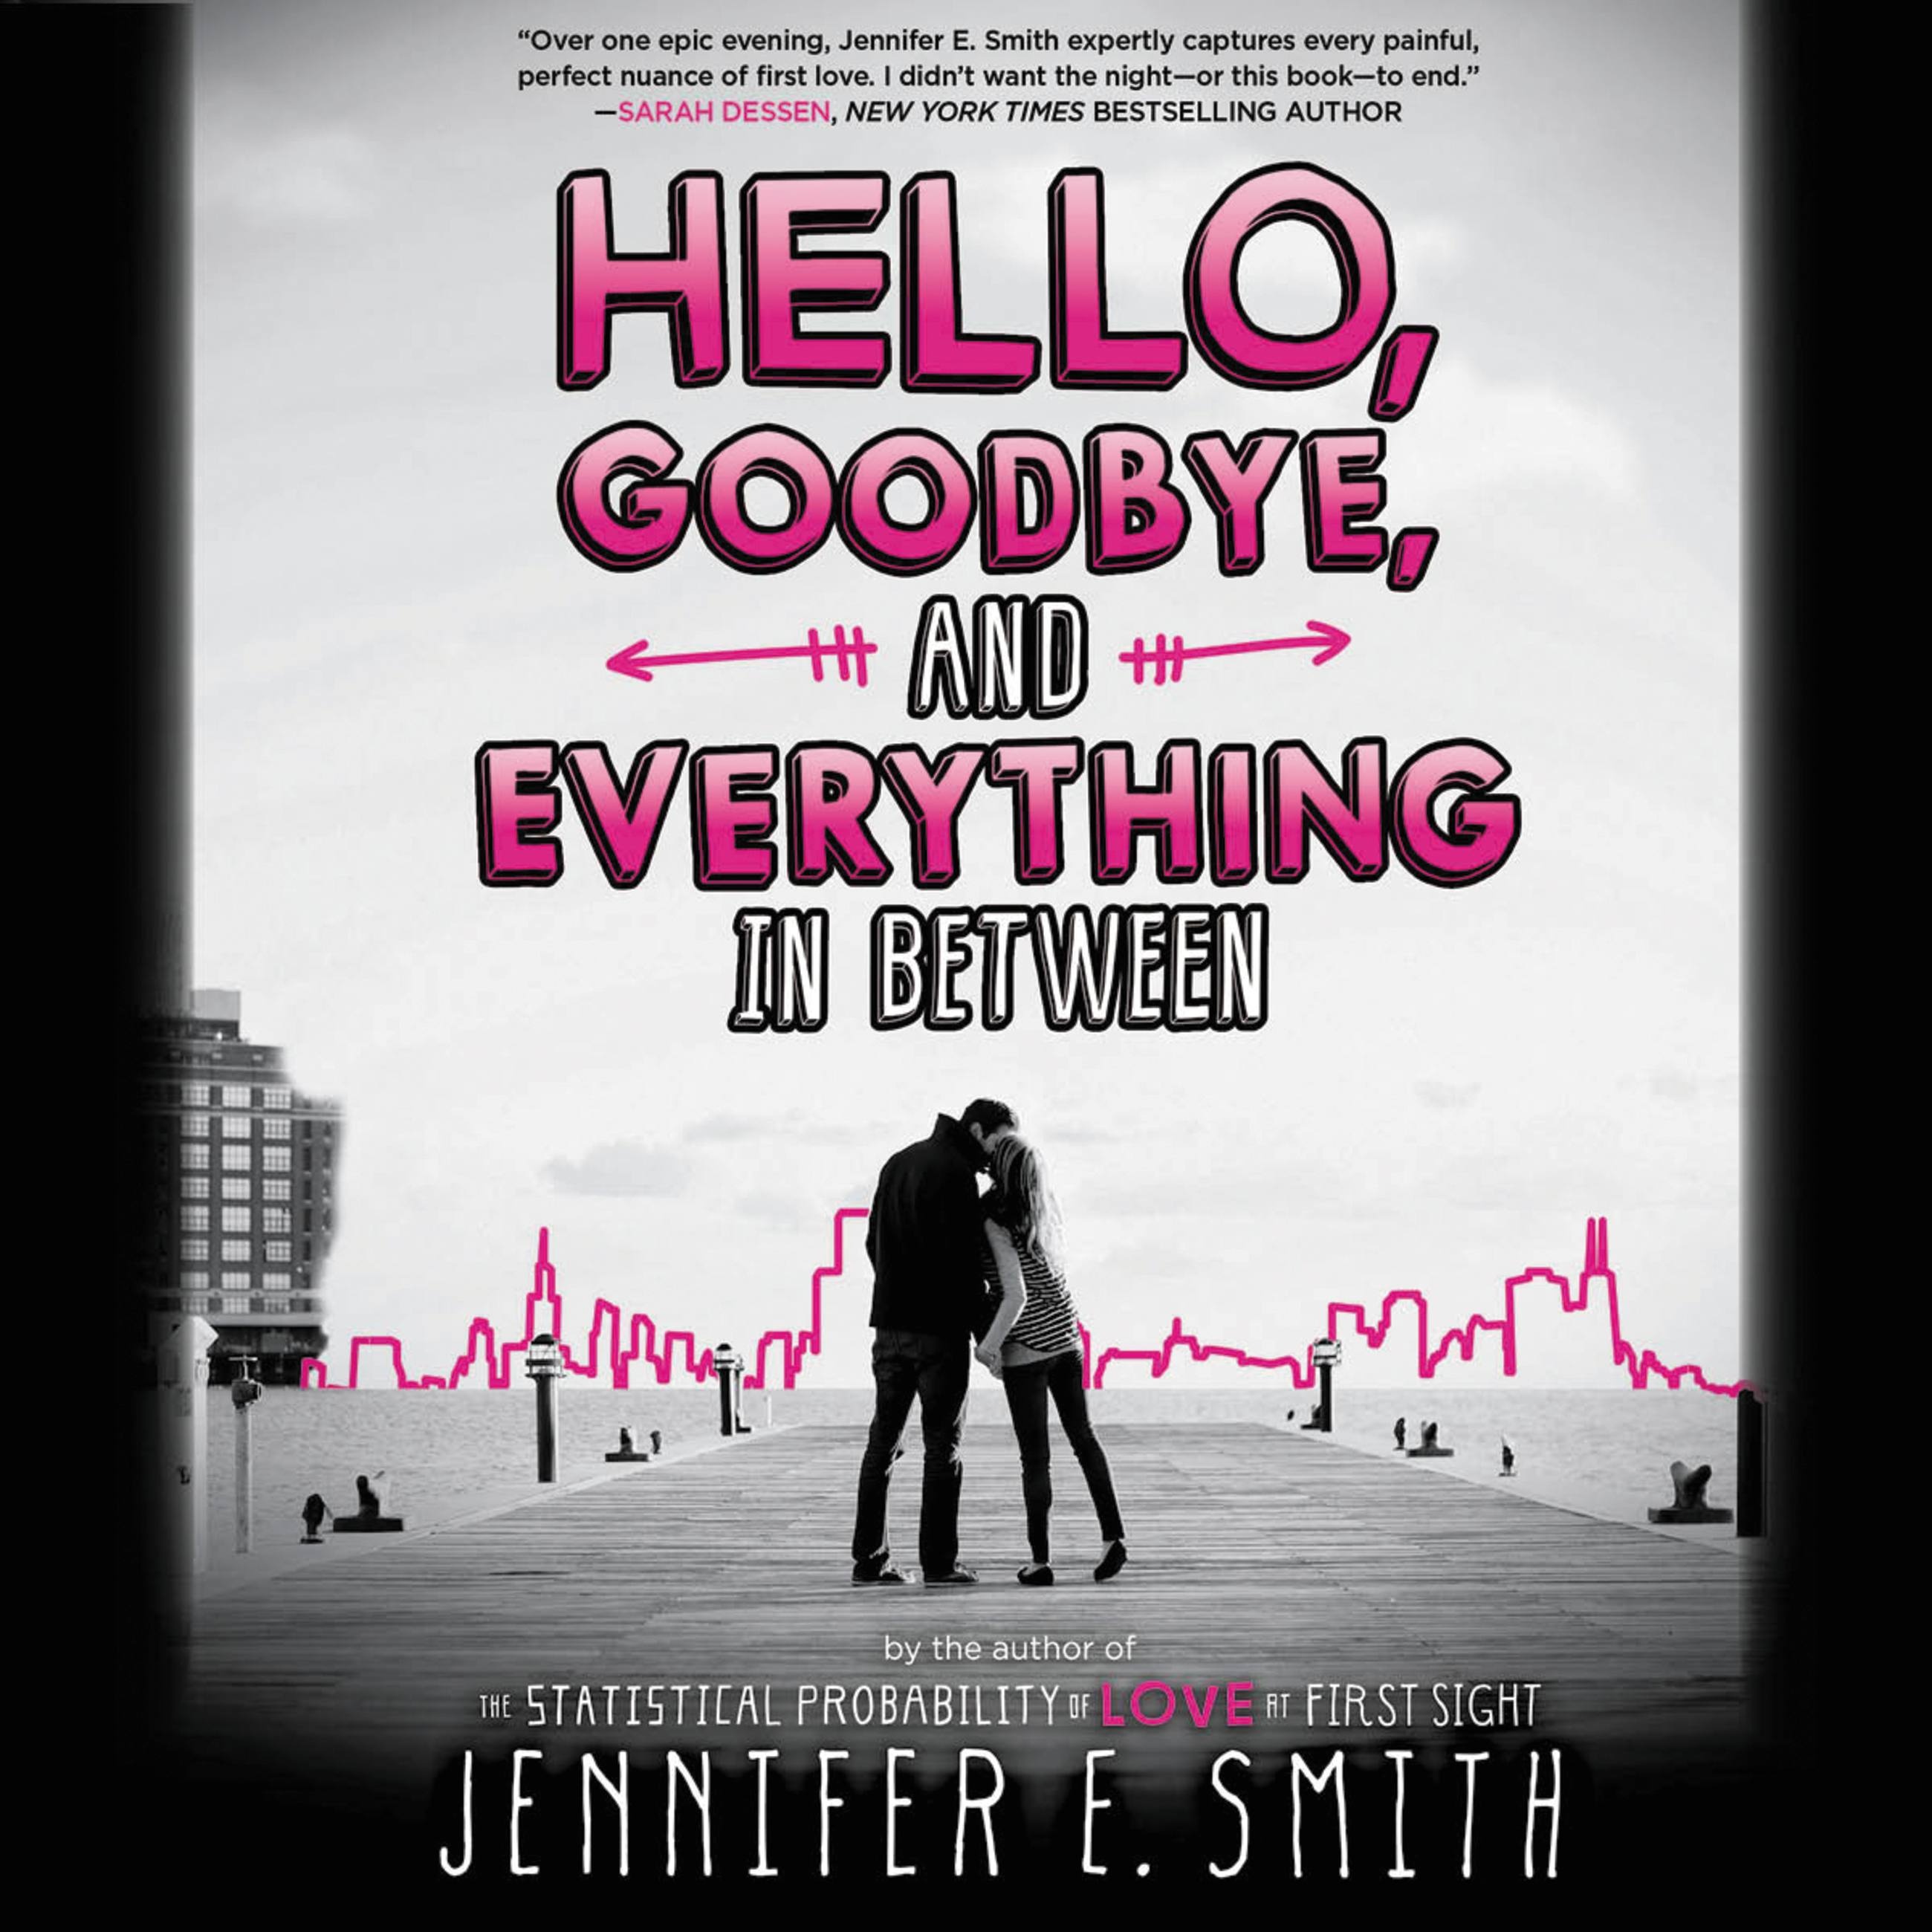 hello goodbye and everything between book